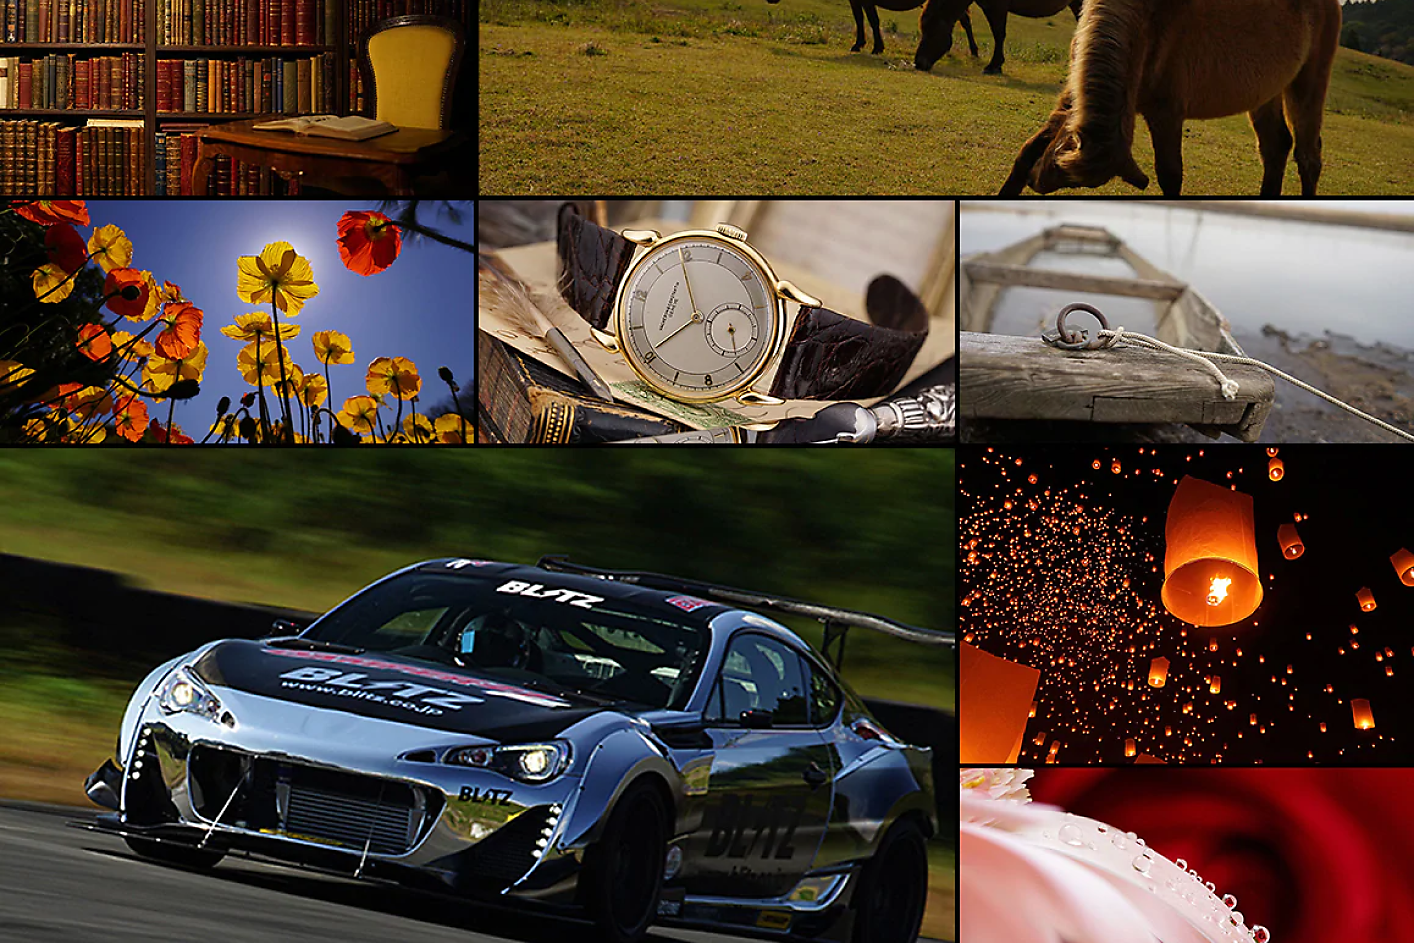 Colourful collage of eight images, including a race car, horse, watch and flowers